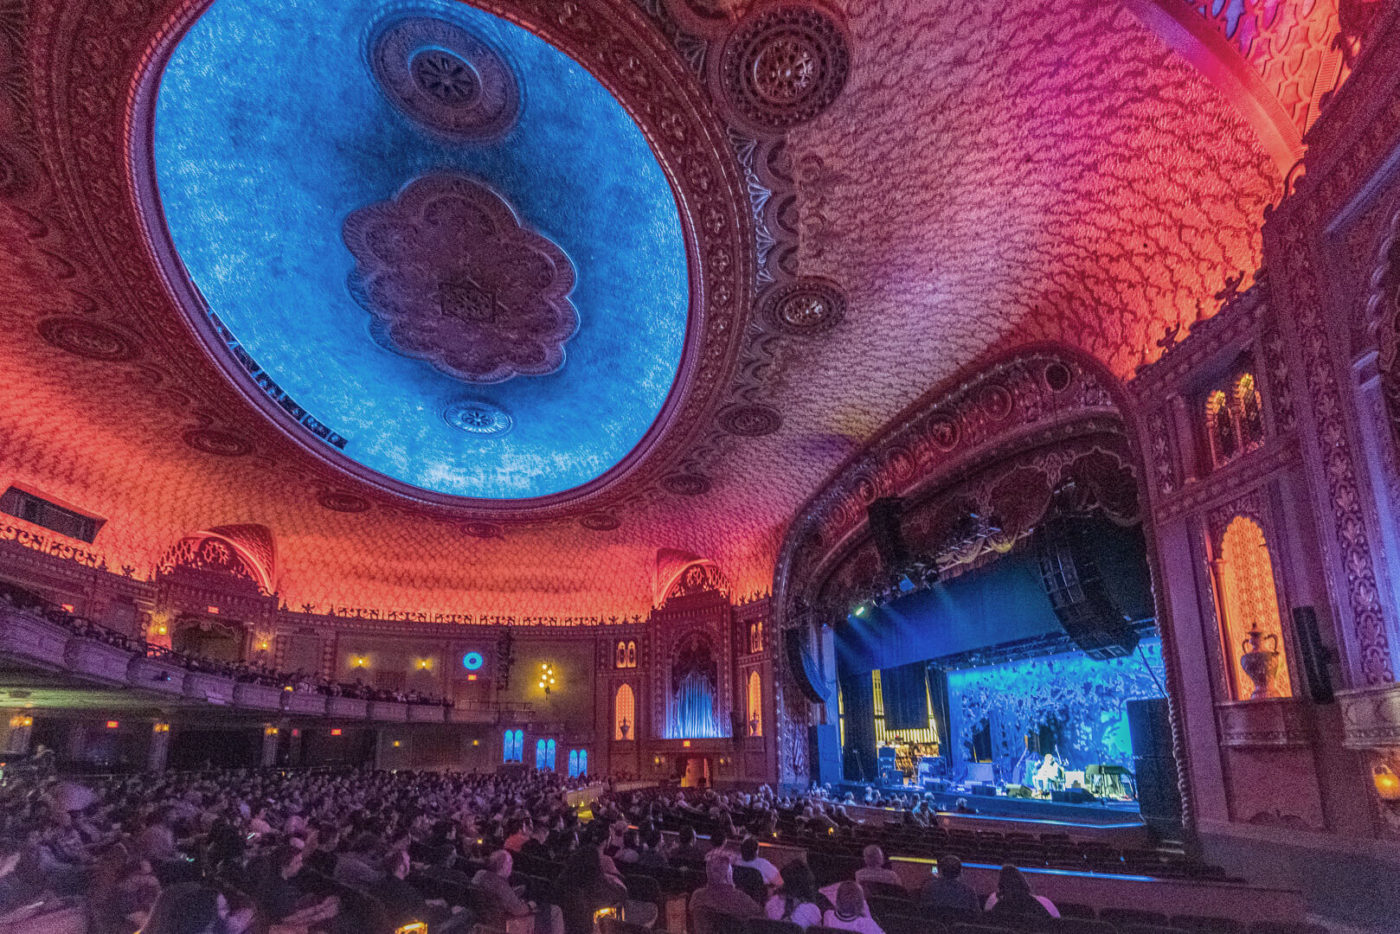 A photo of the ceiling illuminated in blue and red inside the Tennessee Theatre's concert hall.